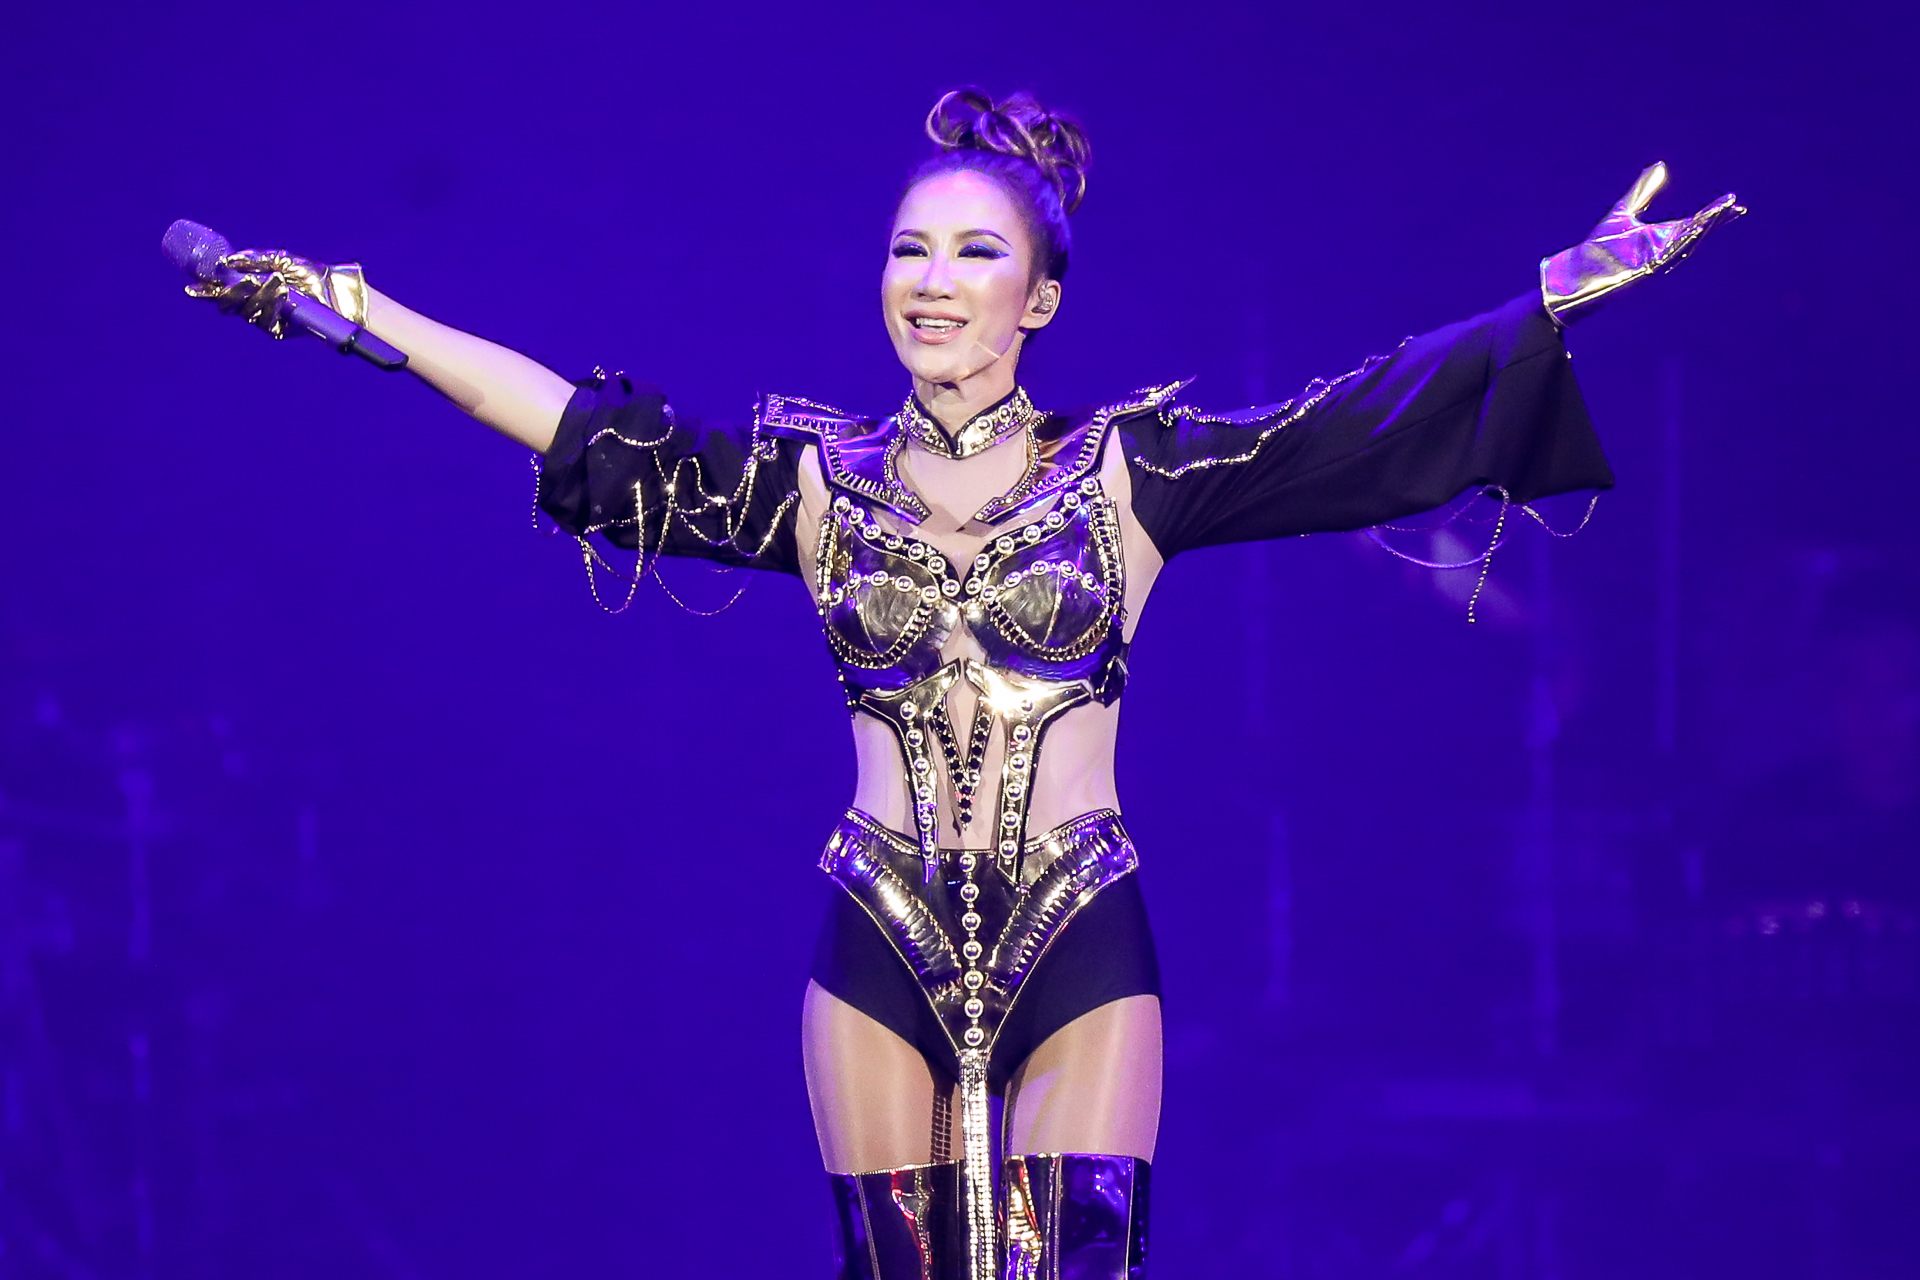 Woman in elaborate metal and black costume holds arms up, mic in one hand